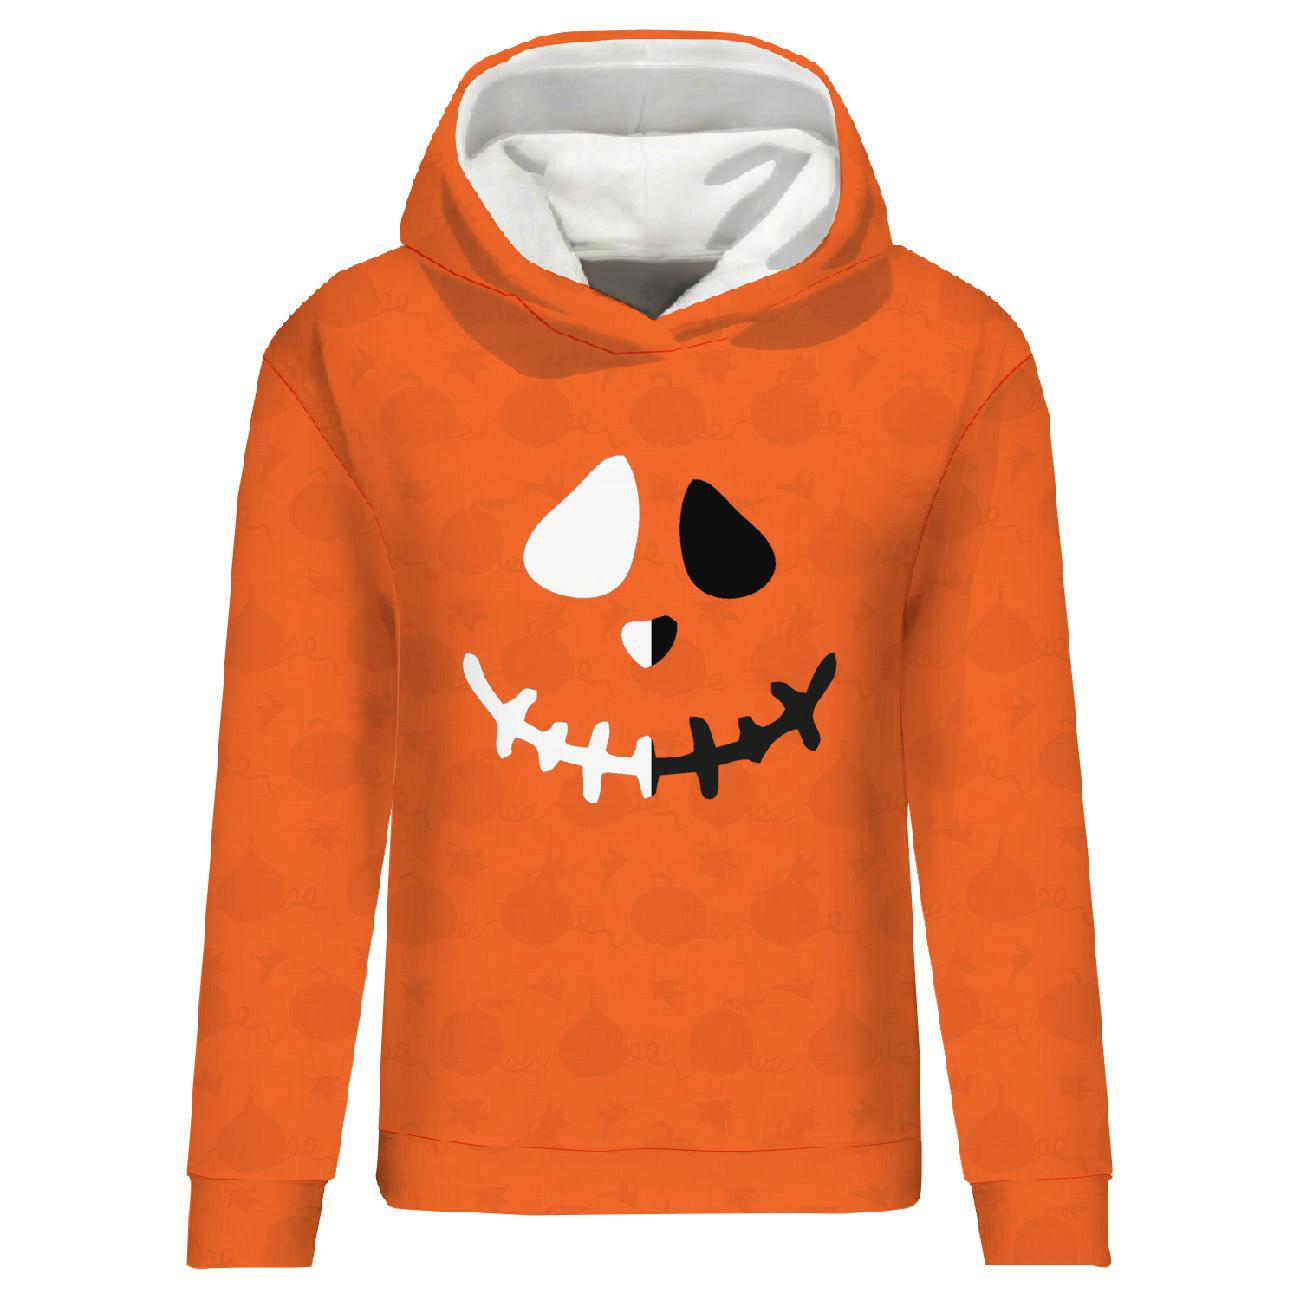 CLASSIC WOMEN’S HOODIE (POLA) - SMILE / PUMPKINS - looped knit fabric 